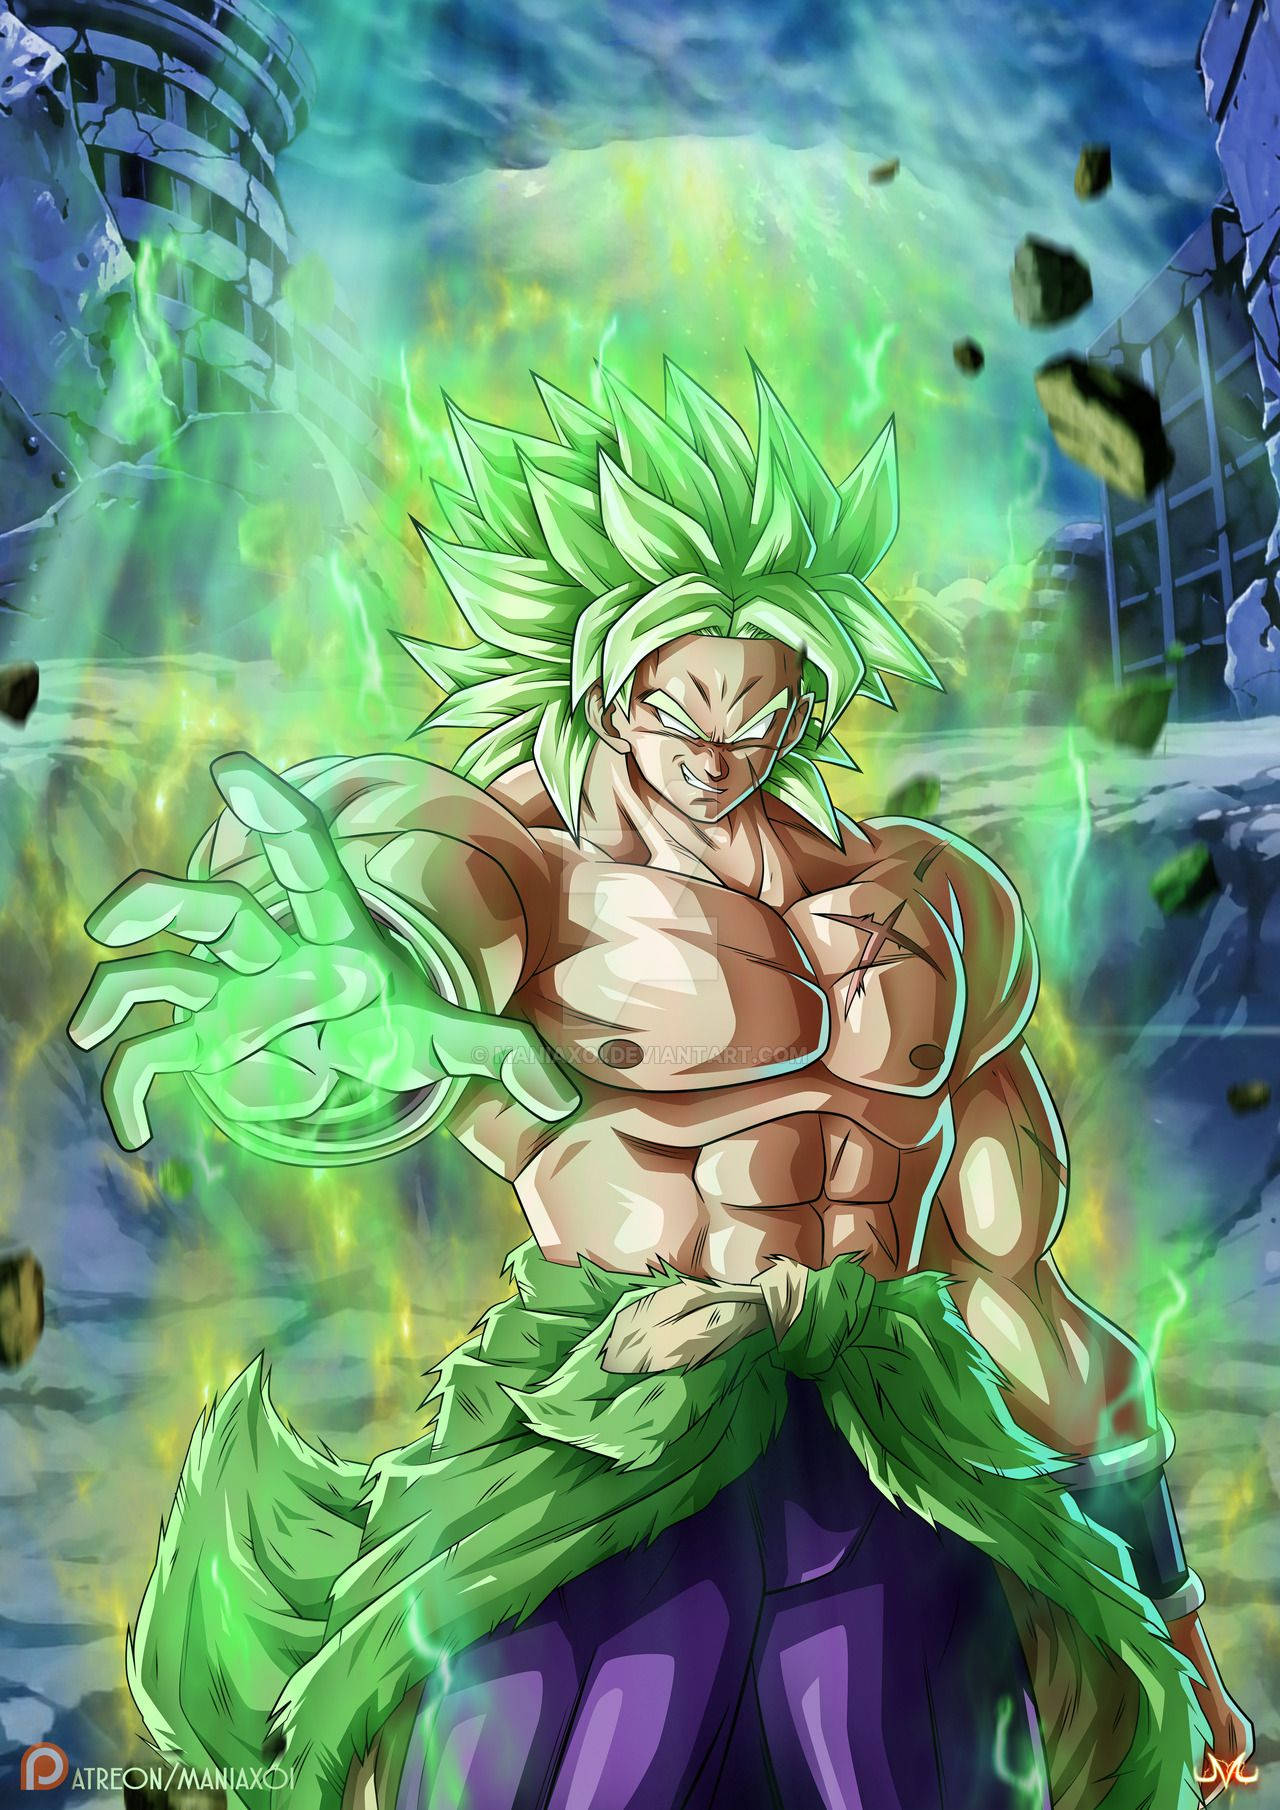 Unleash the legendary power of Broly from the world of Dragon Ball Super! Wallpaper